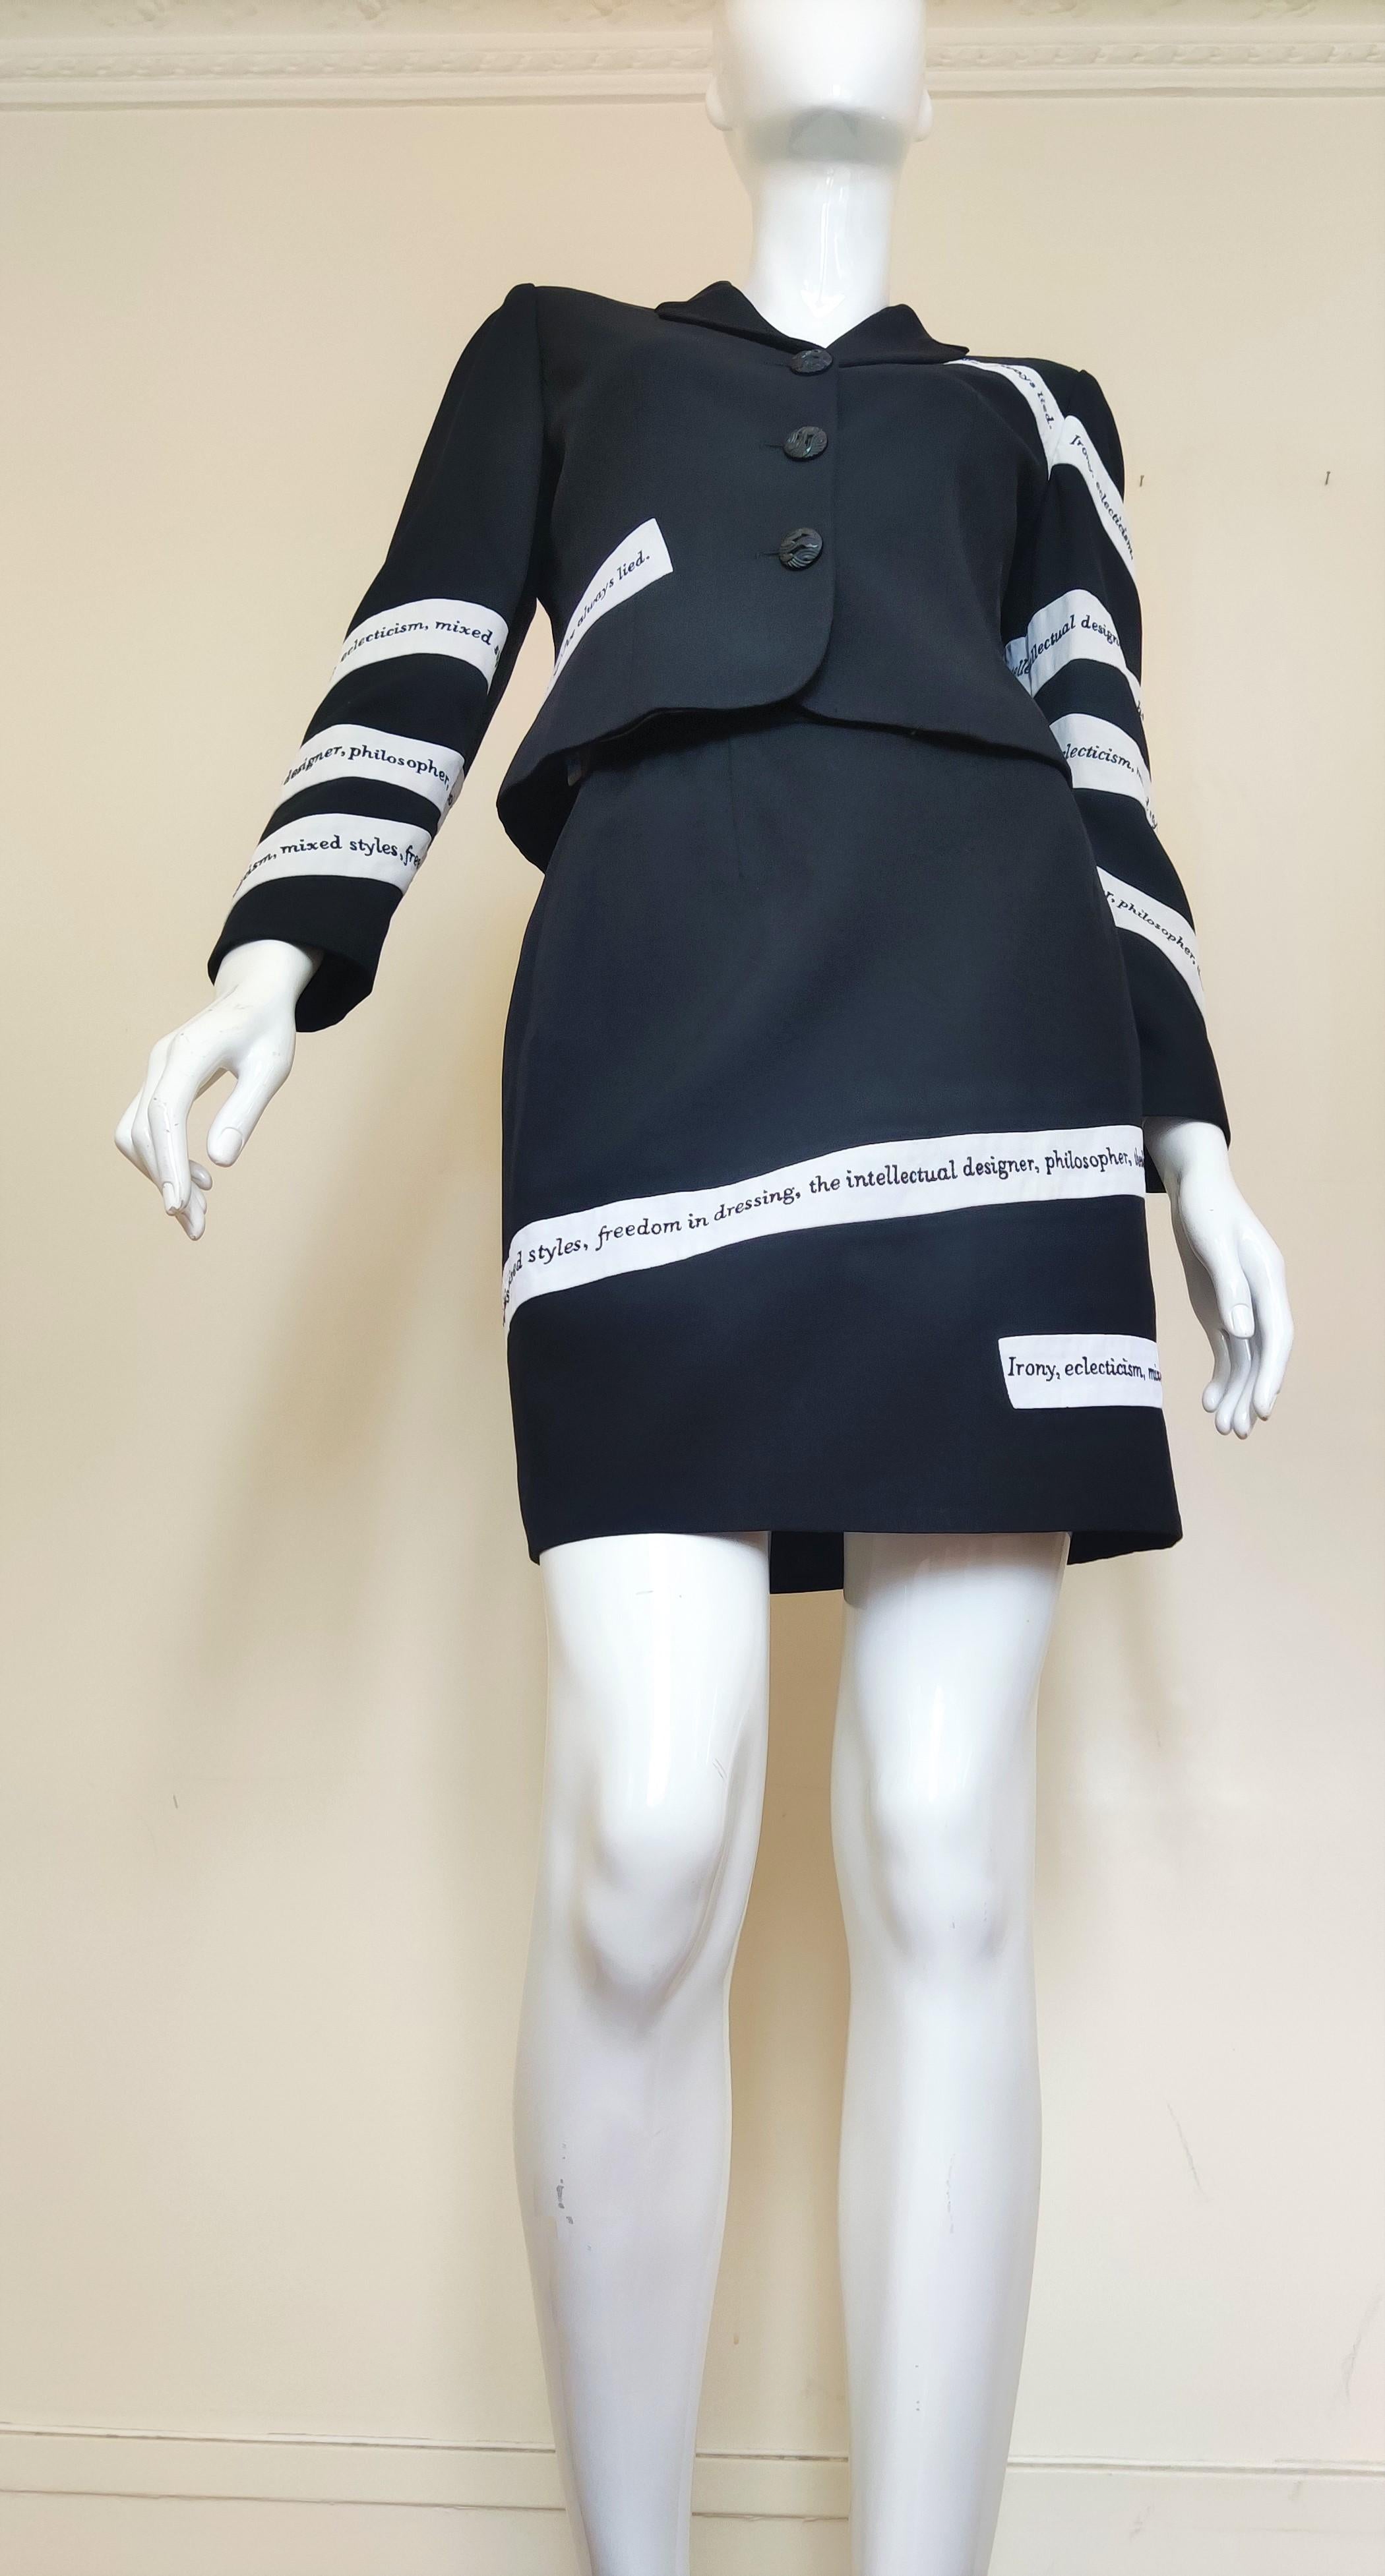 Moschino Cheap and Chic Ironies Text Tape Vintage Couture Black White Dress Suit en vente 5